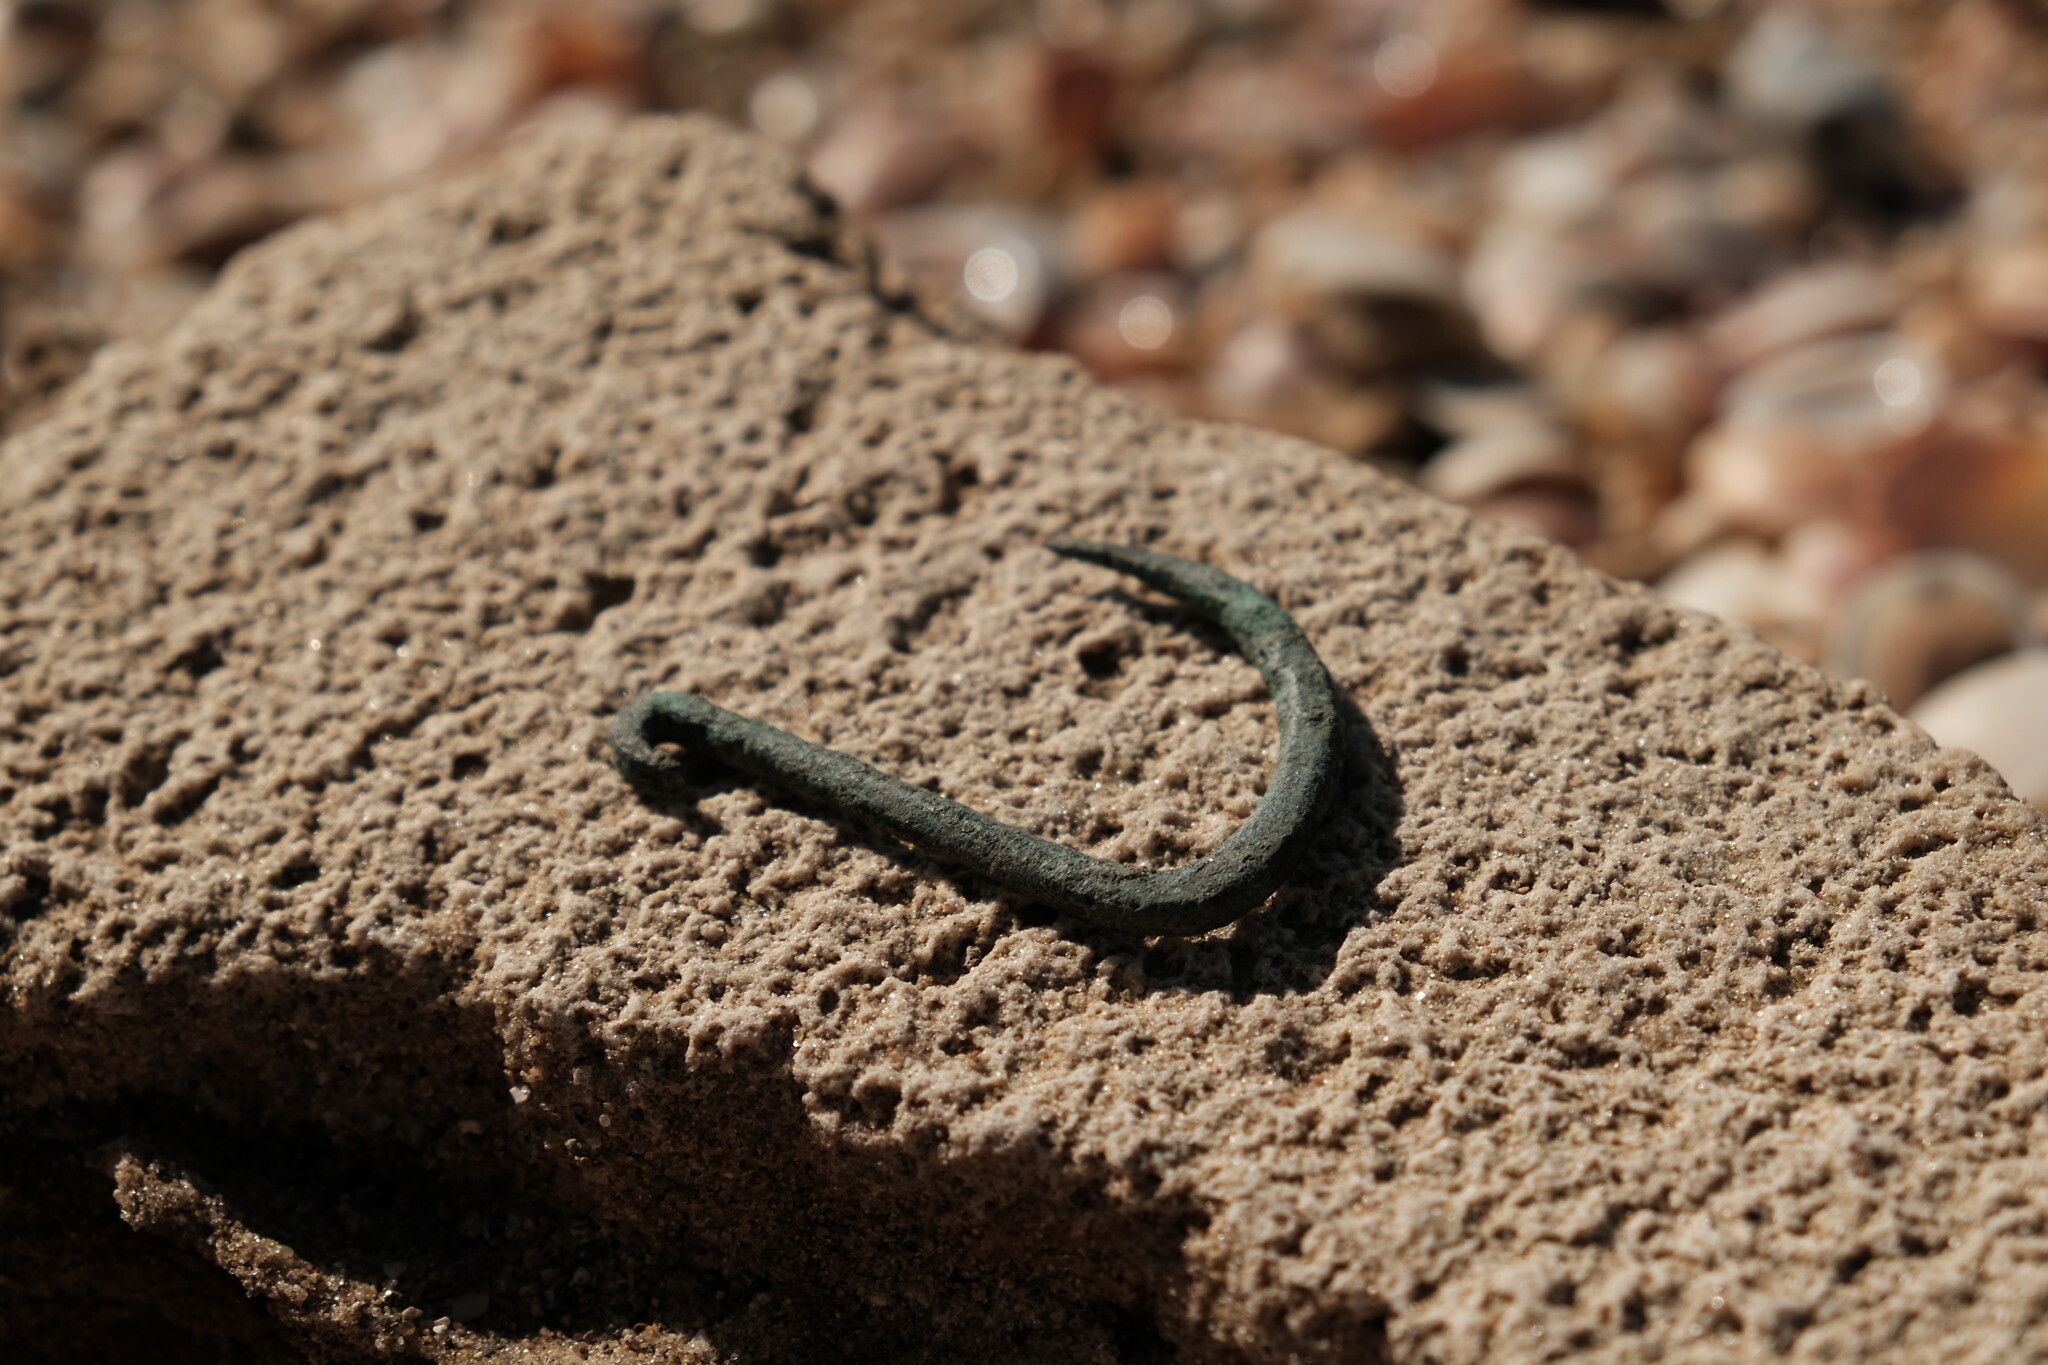 Ancient jaws: 6,000-year-old copper fishhook, oldest in region, was likely  for sharks